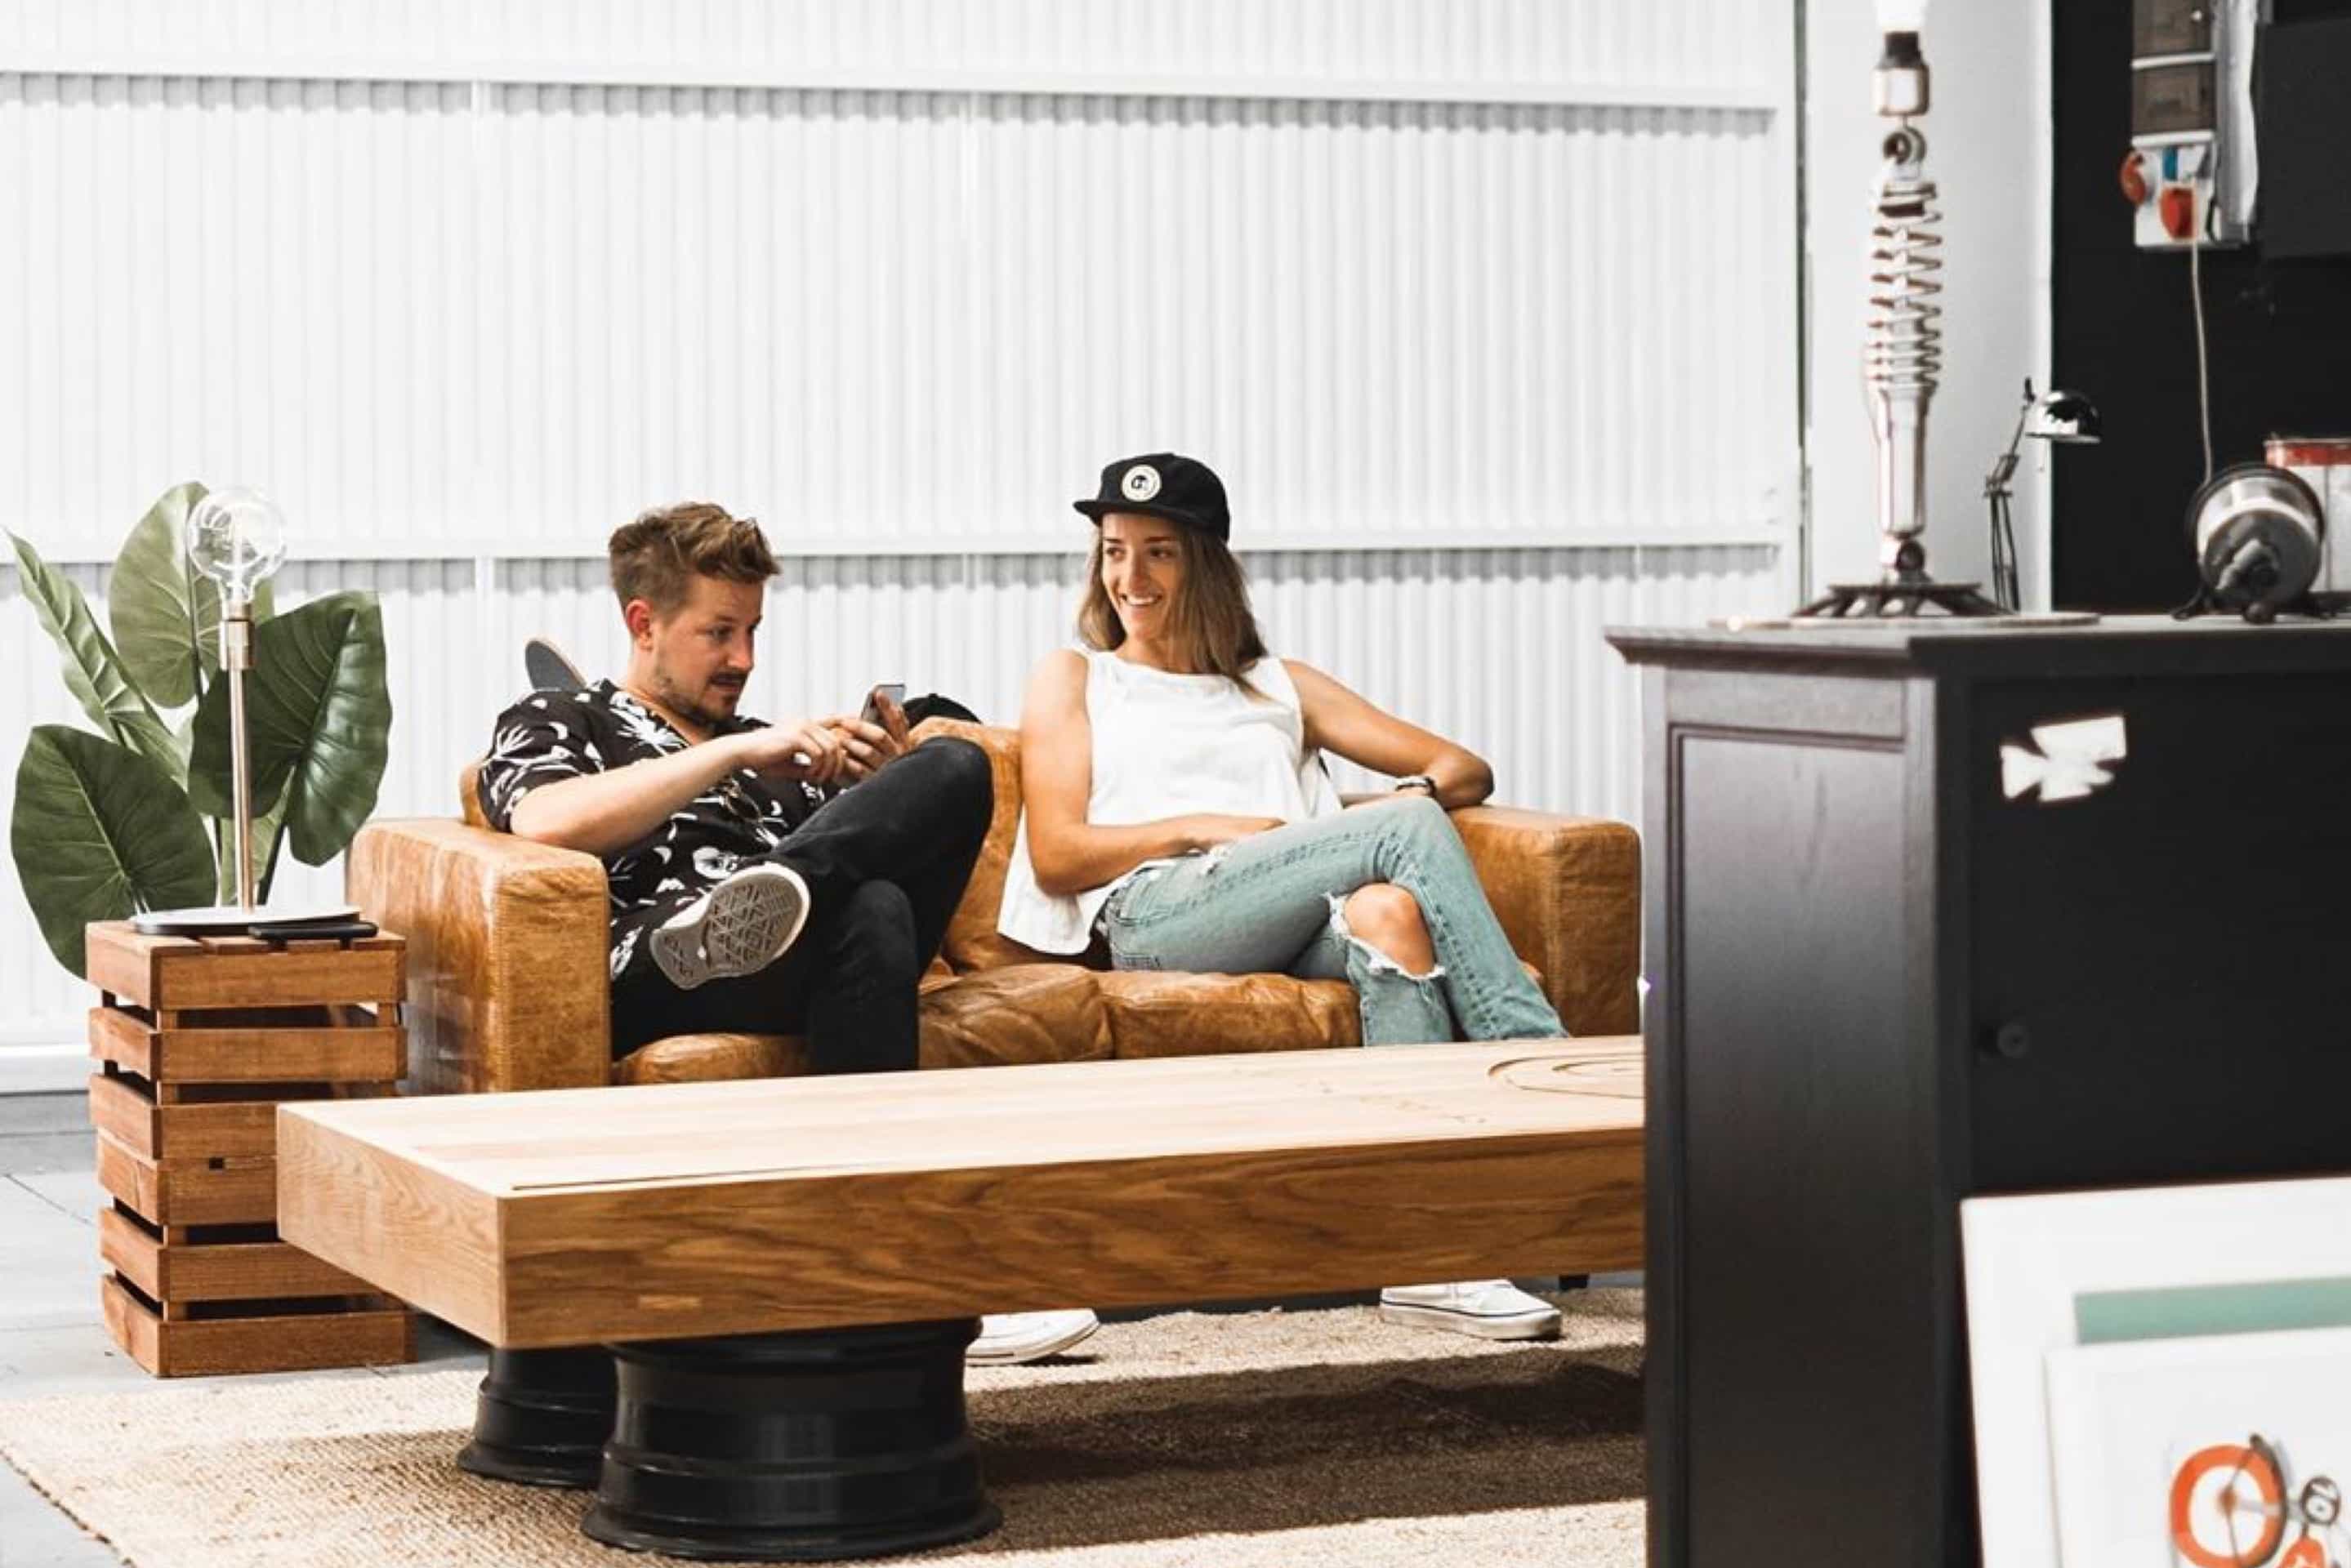 Two people sitting on a sofa are engaged in a lively discussion